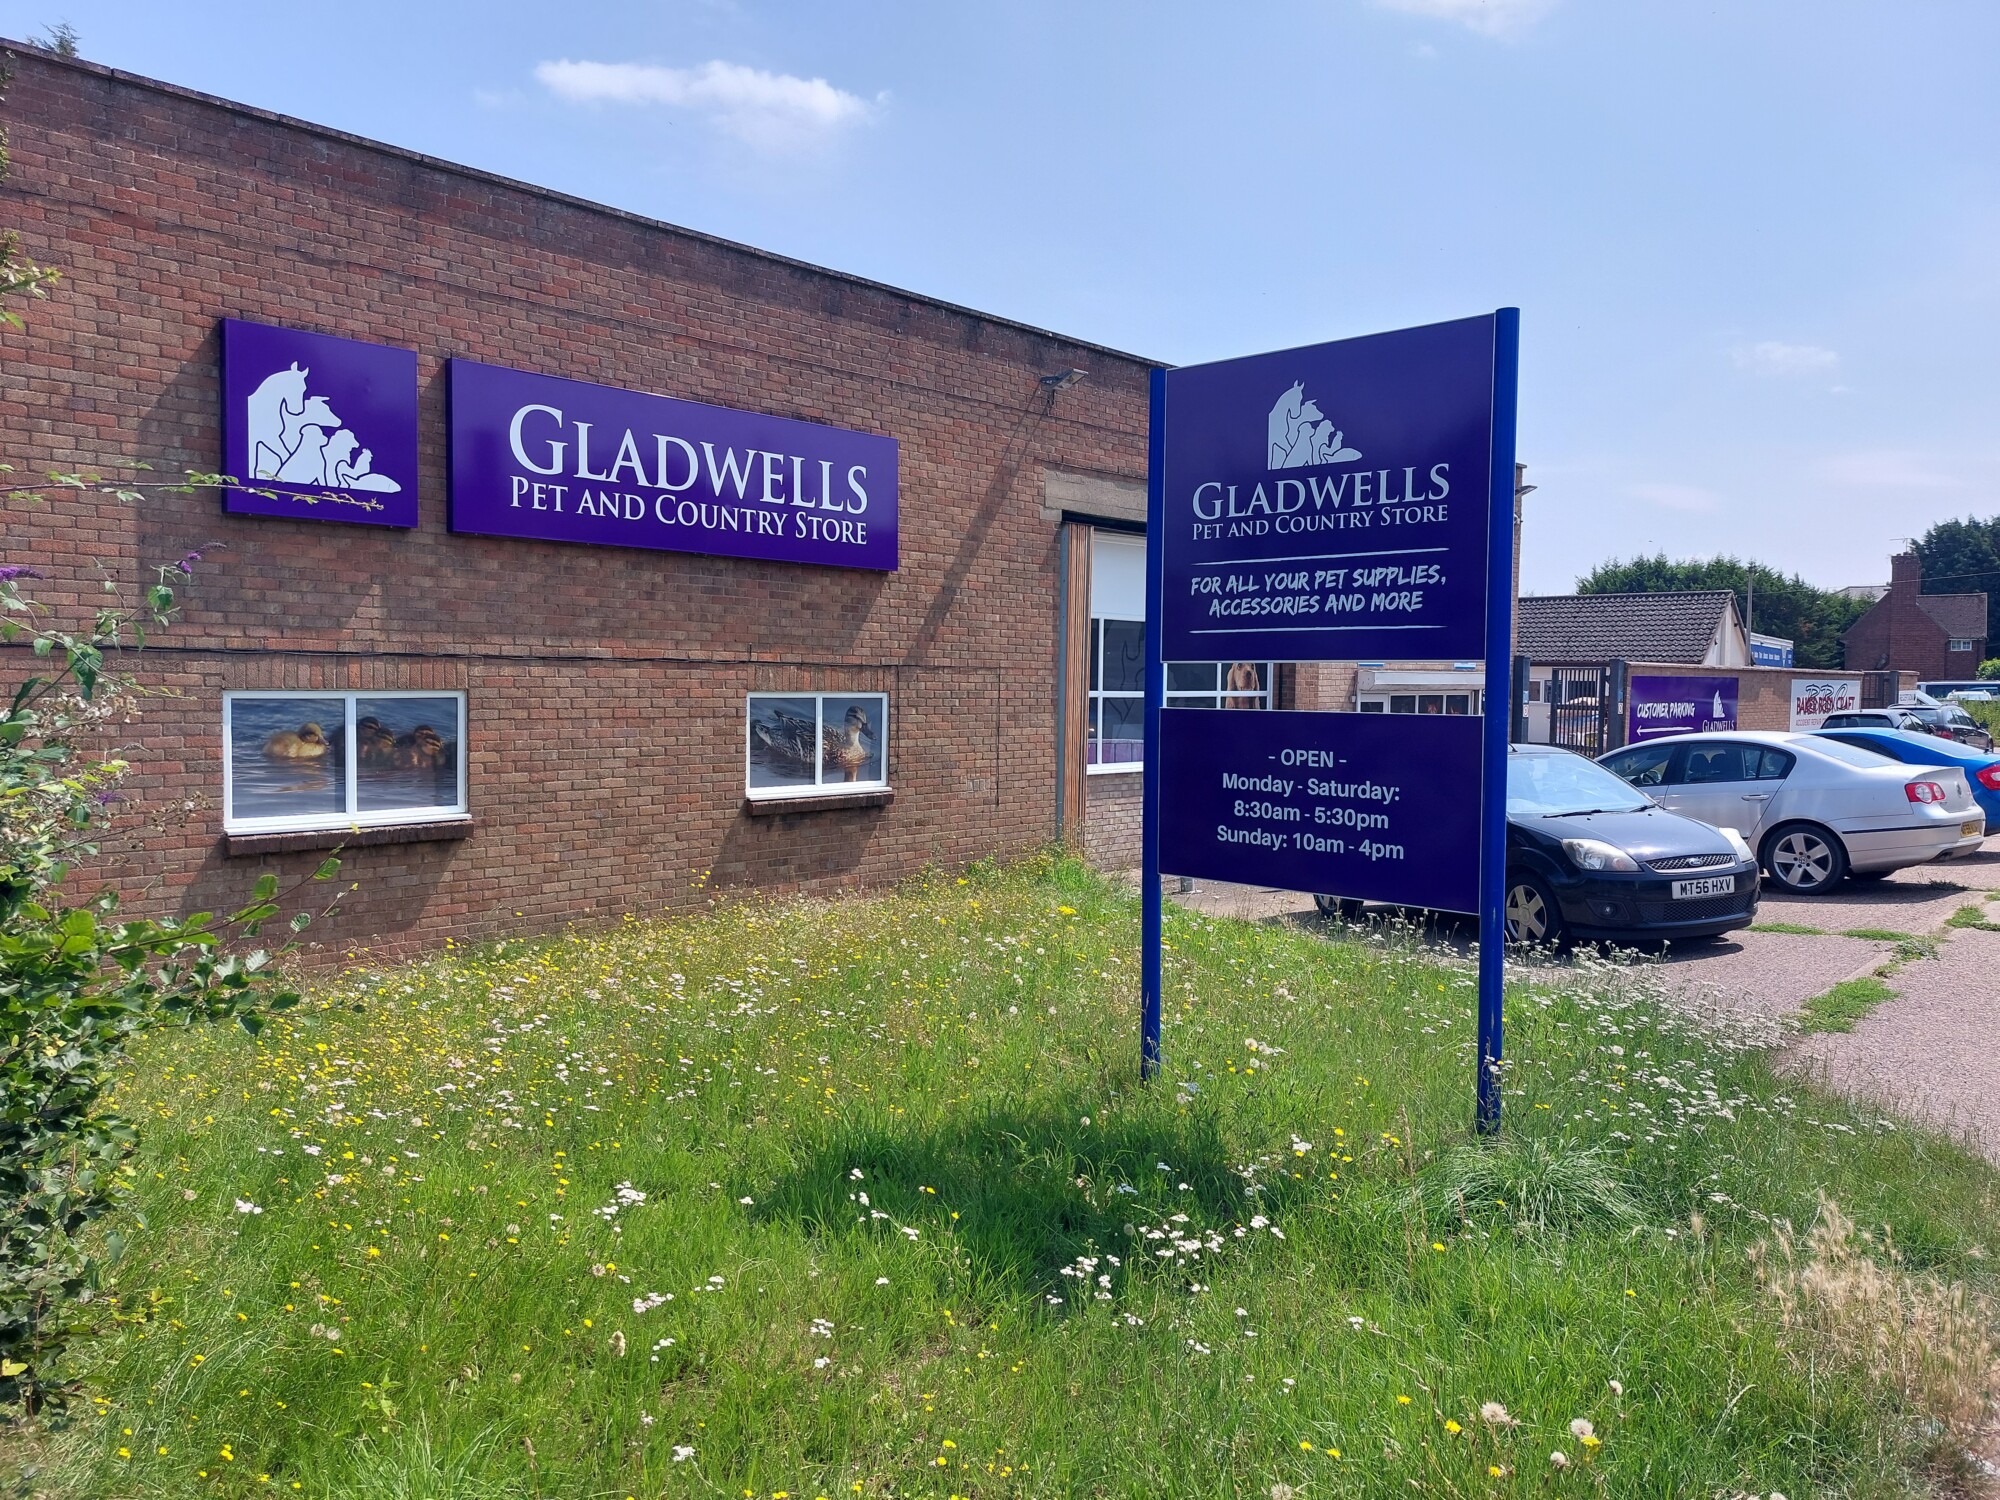 Gladwells Pet & Country Store Margate - Pet food supplies